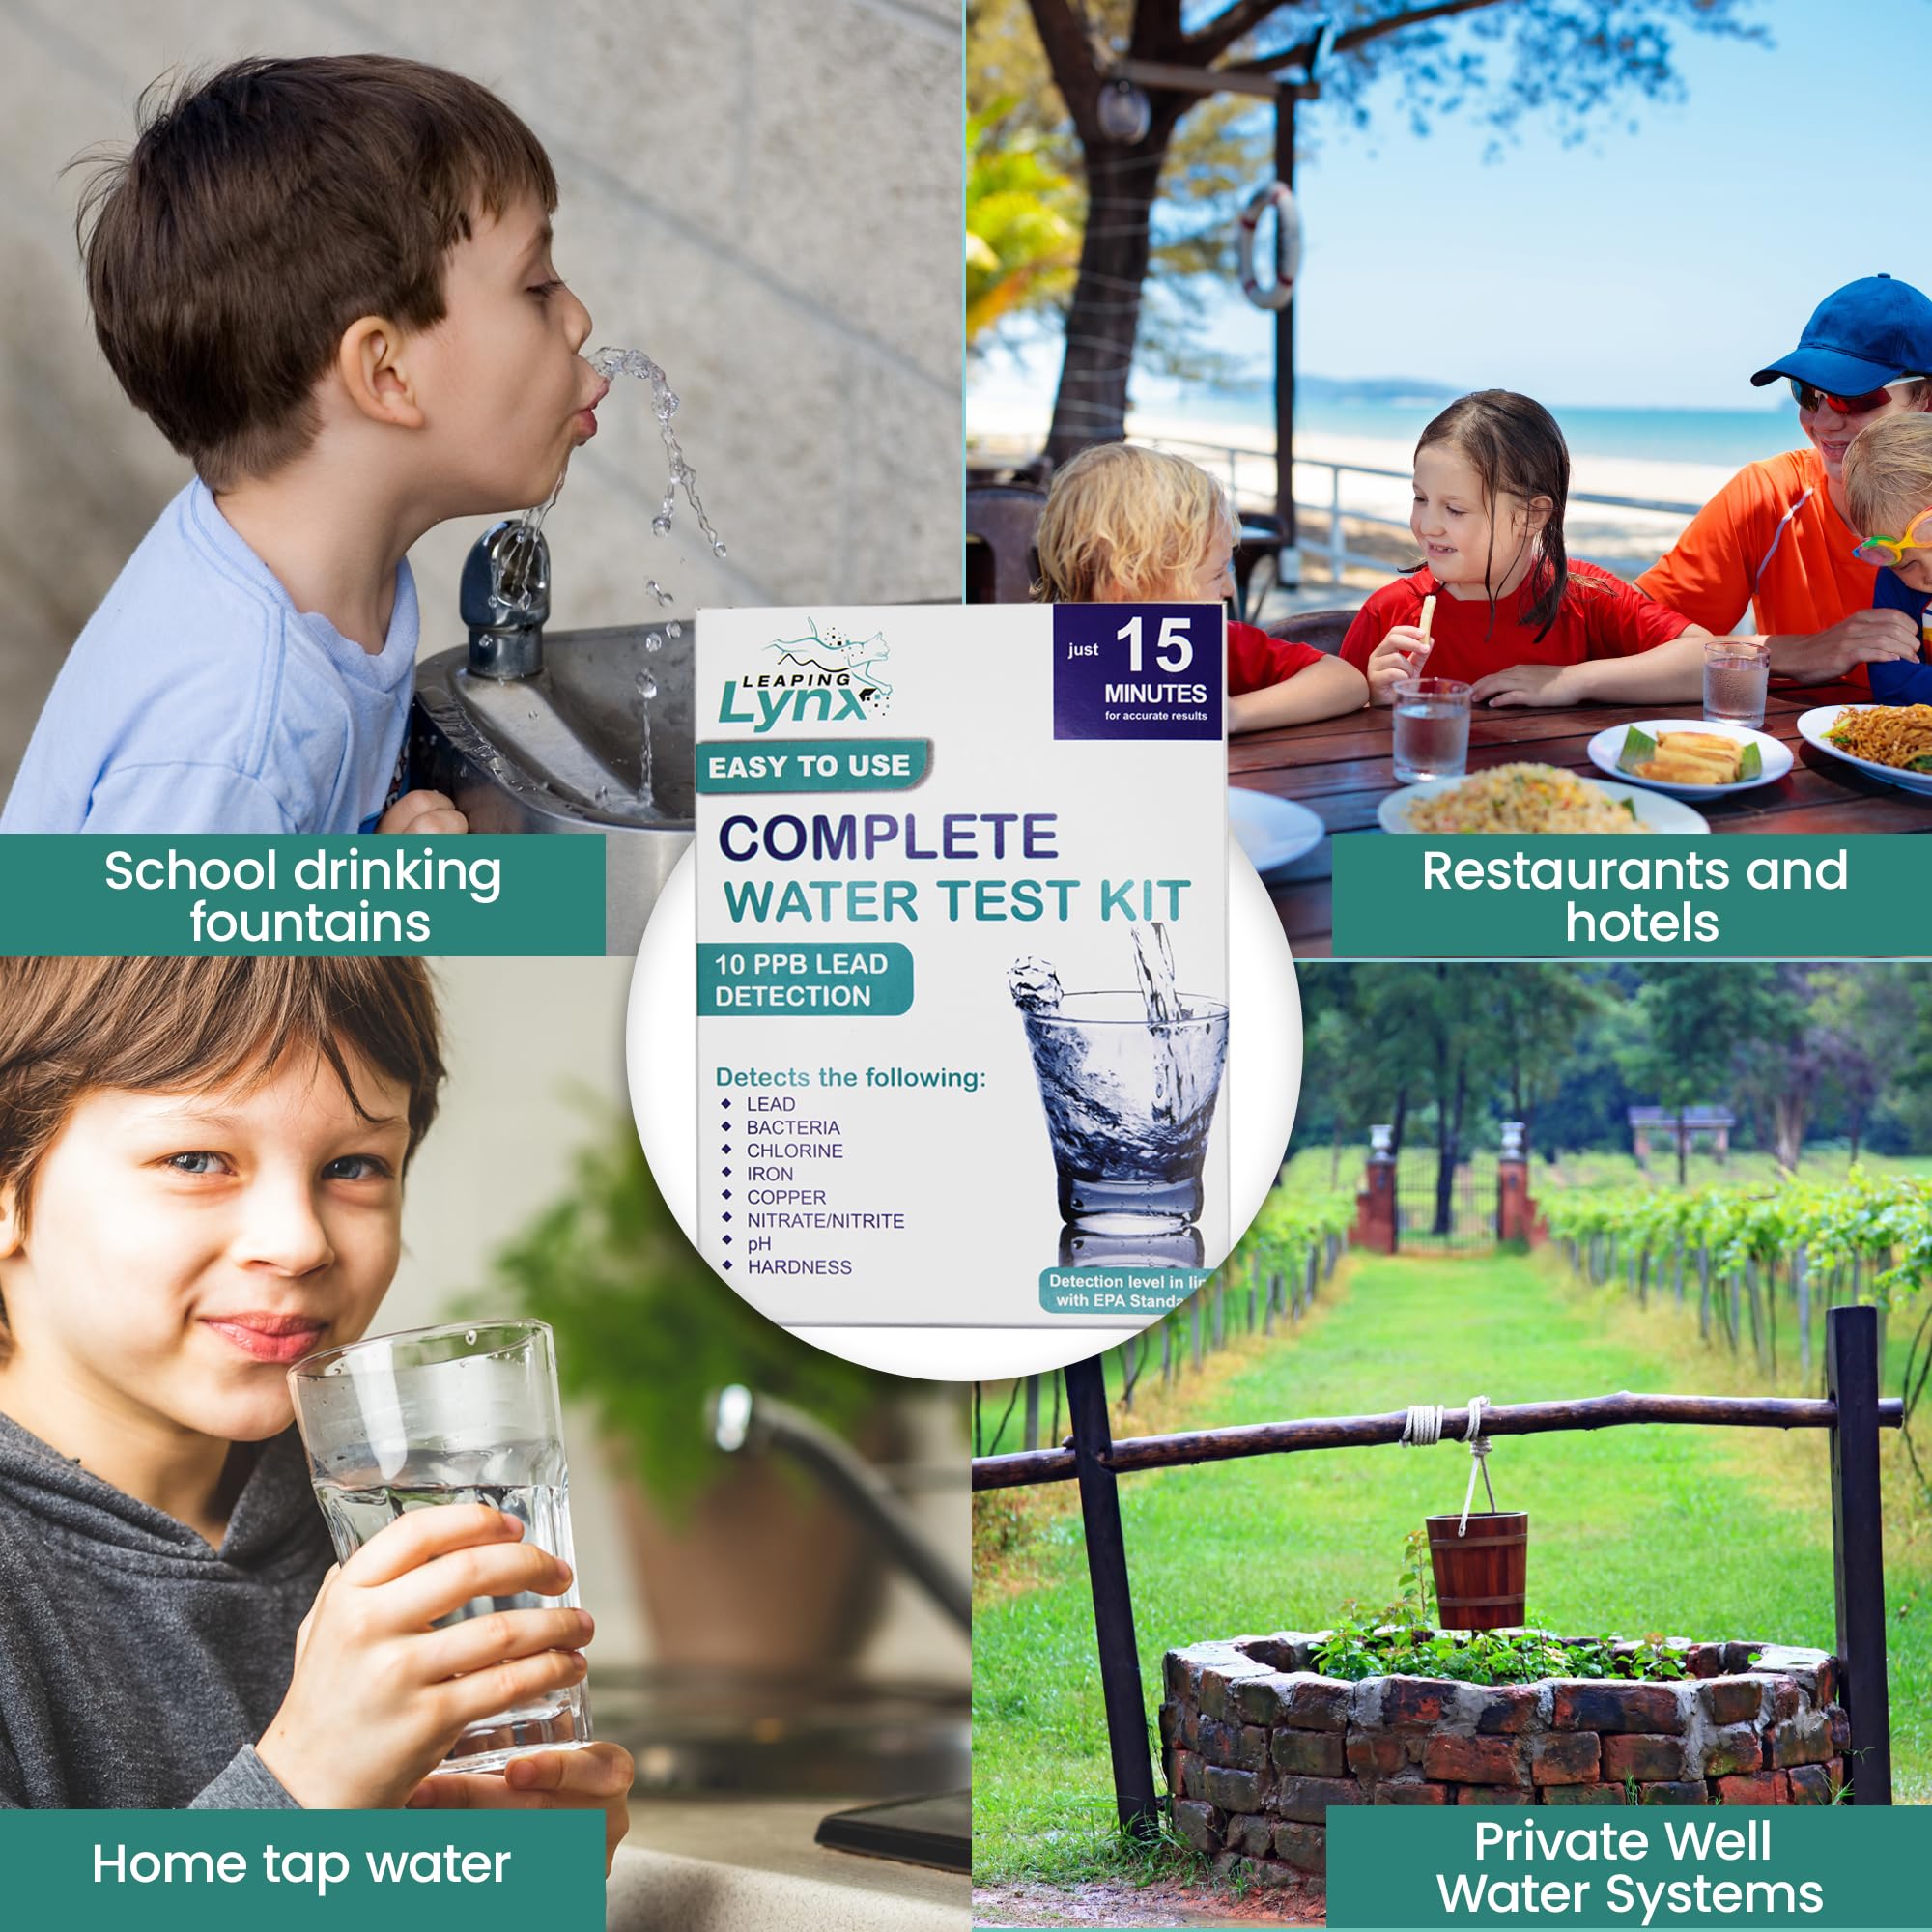 EPA-Recommended Detection Water Test Kit for Lead, Bacteria, Hardness, pH, Nitrate, Nitrite, Chlorine, Iron & Copper - for Well Water & Tap Water, Rapid Results with Easy Instructions